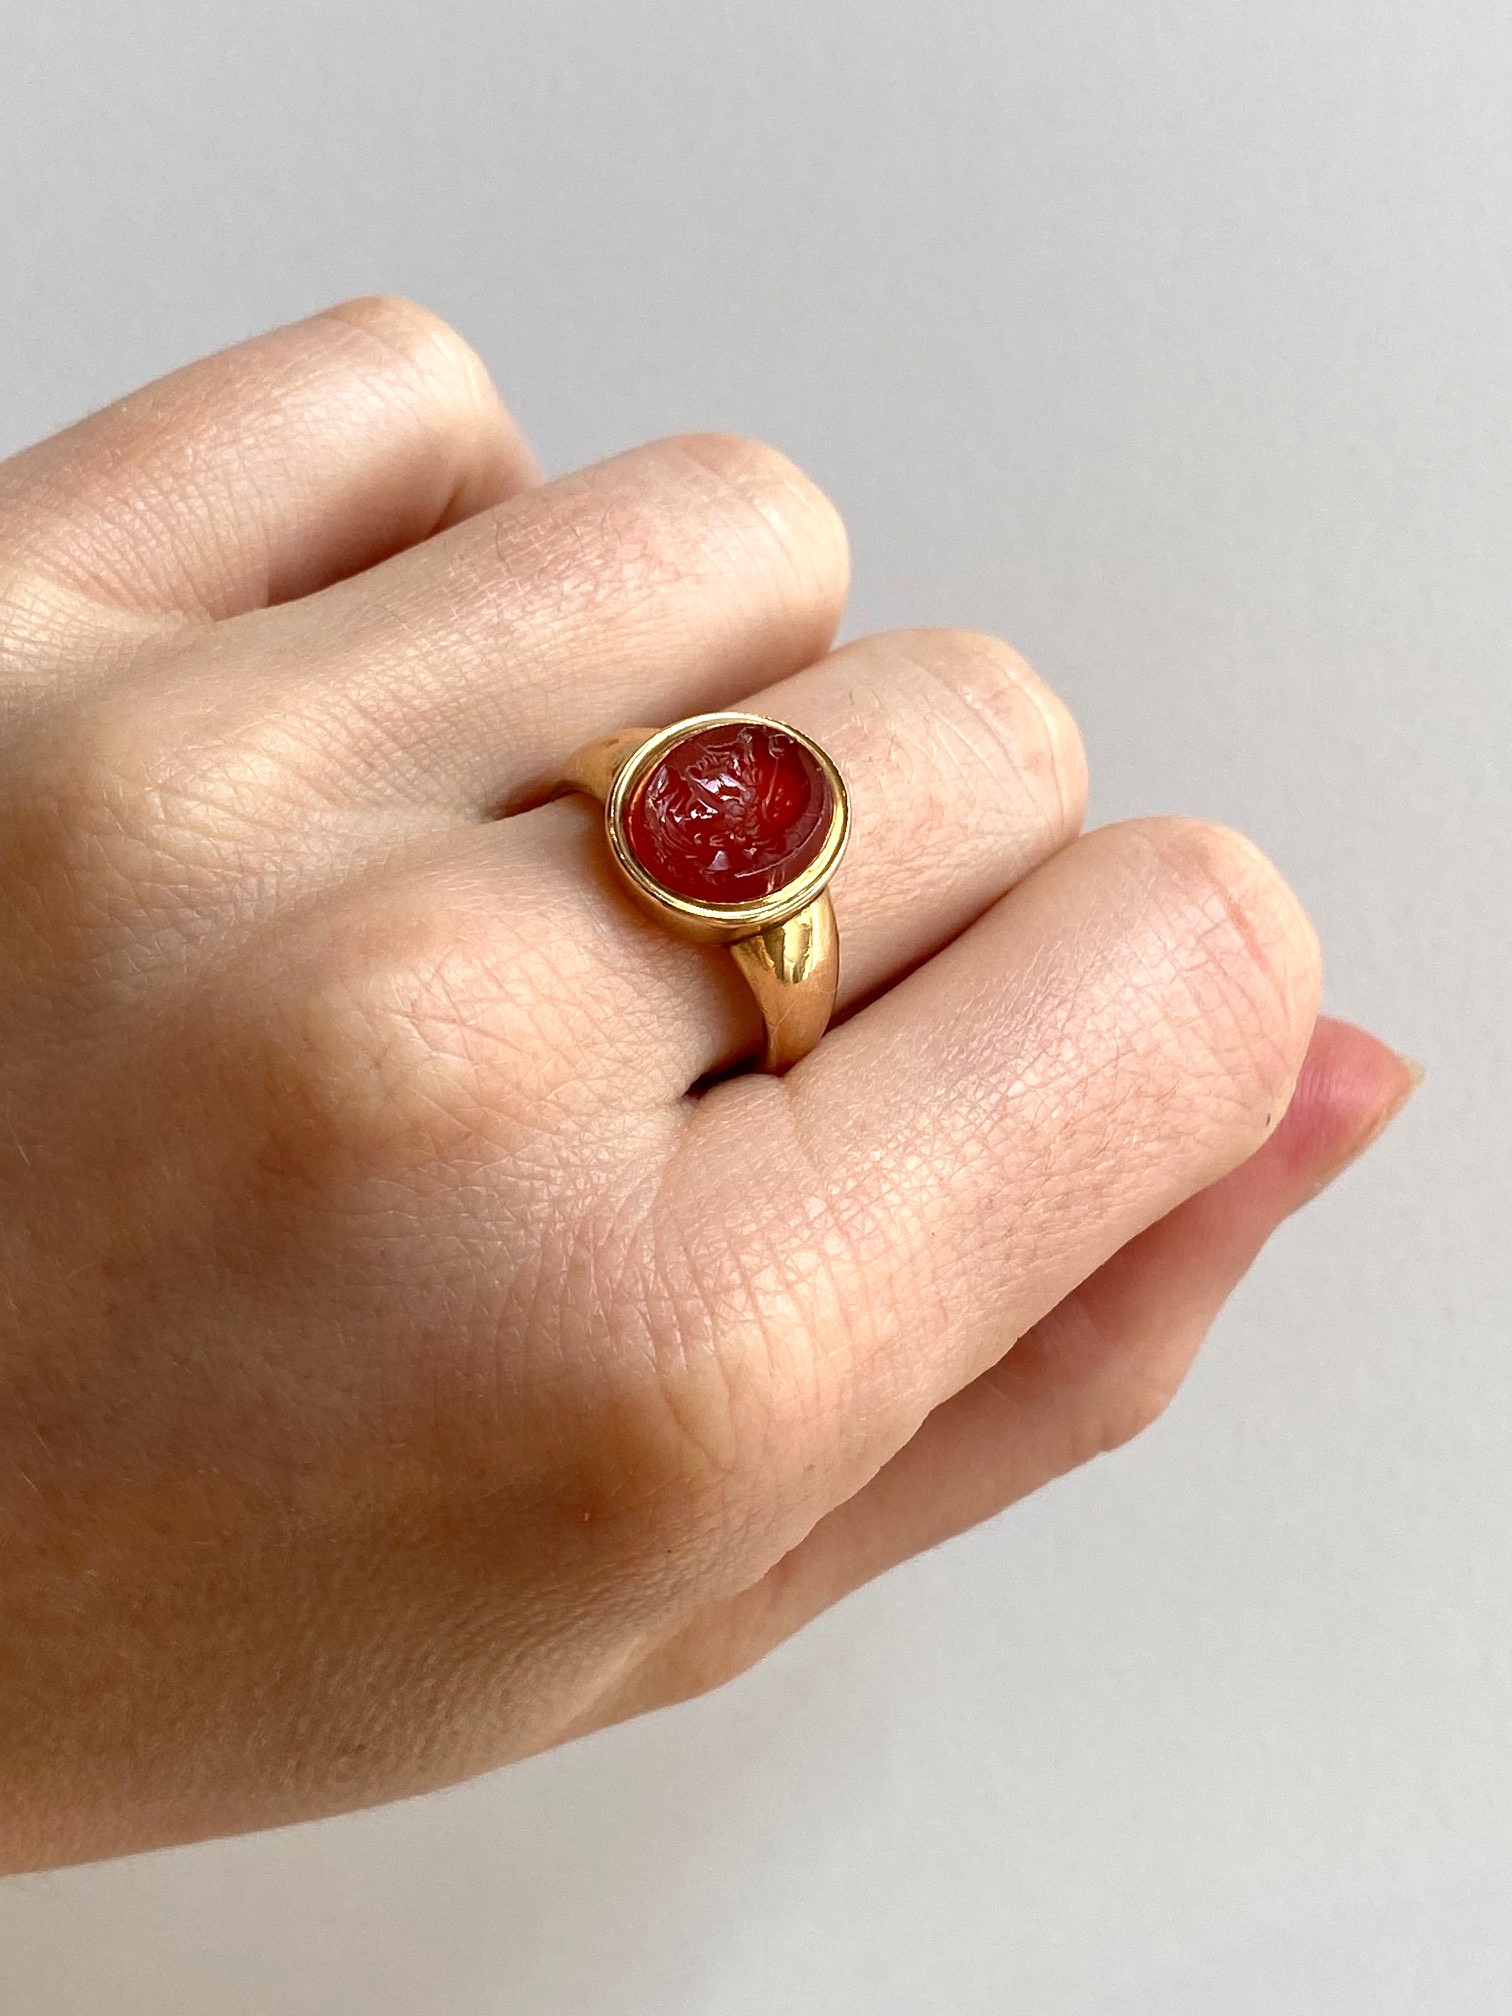 CARNELIAN INTAGLIO GOLD SIGNET RING, EARLY 19TH CENTURY - Image 2 of 6